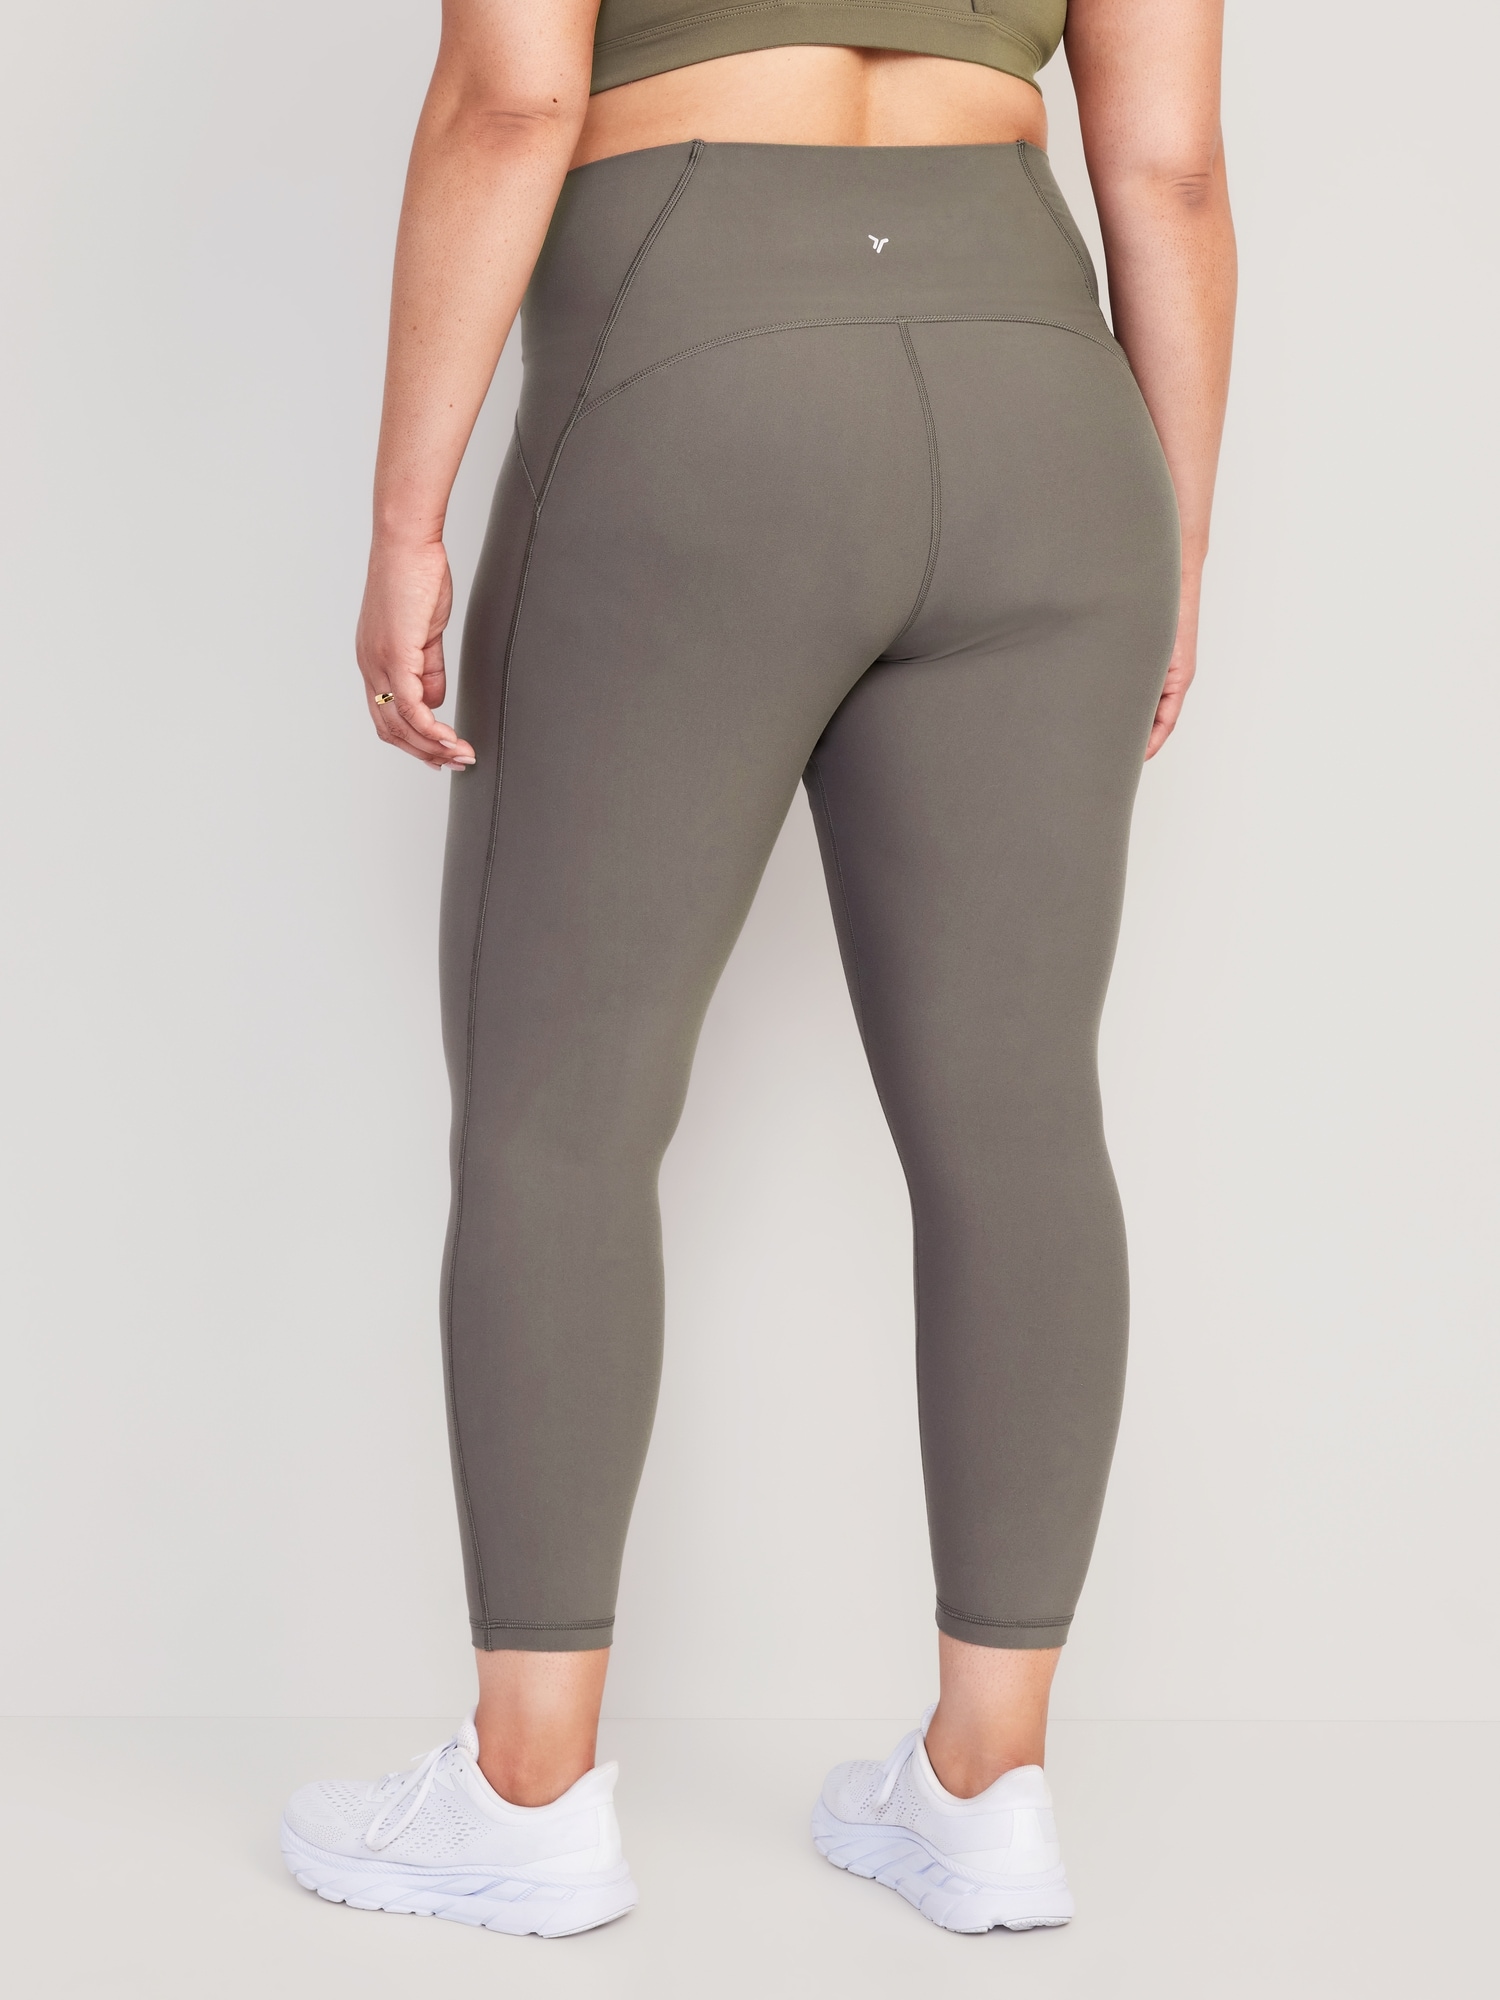 $35 'buttery' leggings are a dupe for $120 Lululemon ones